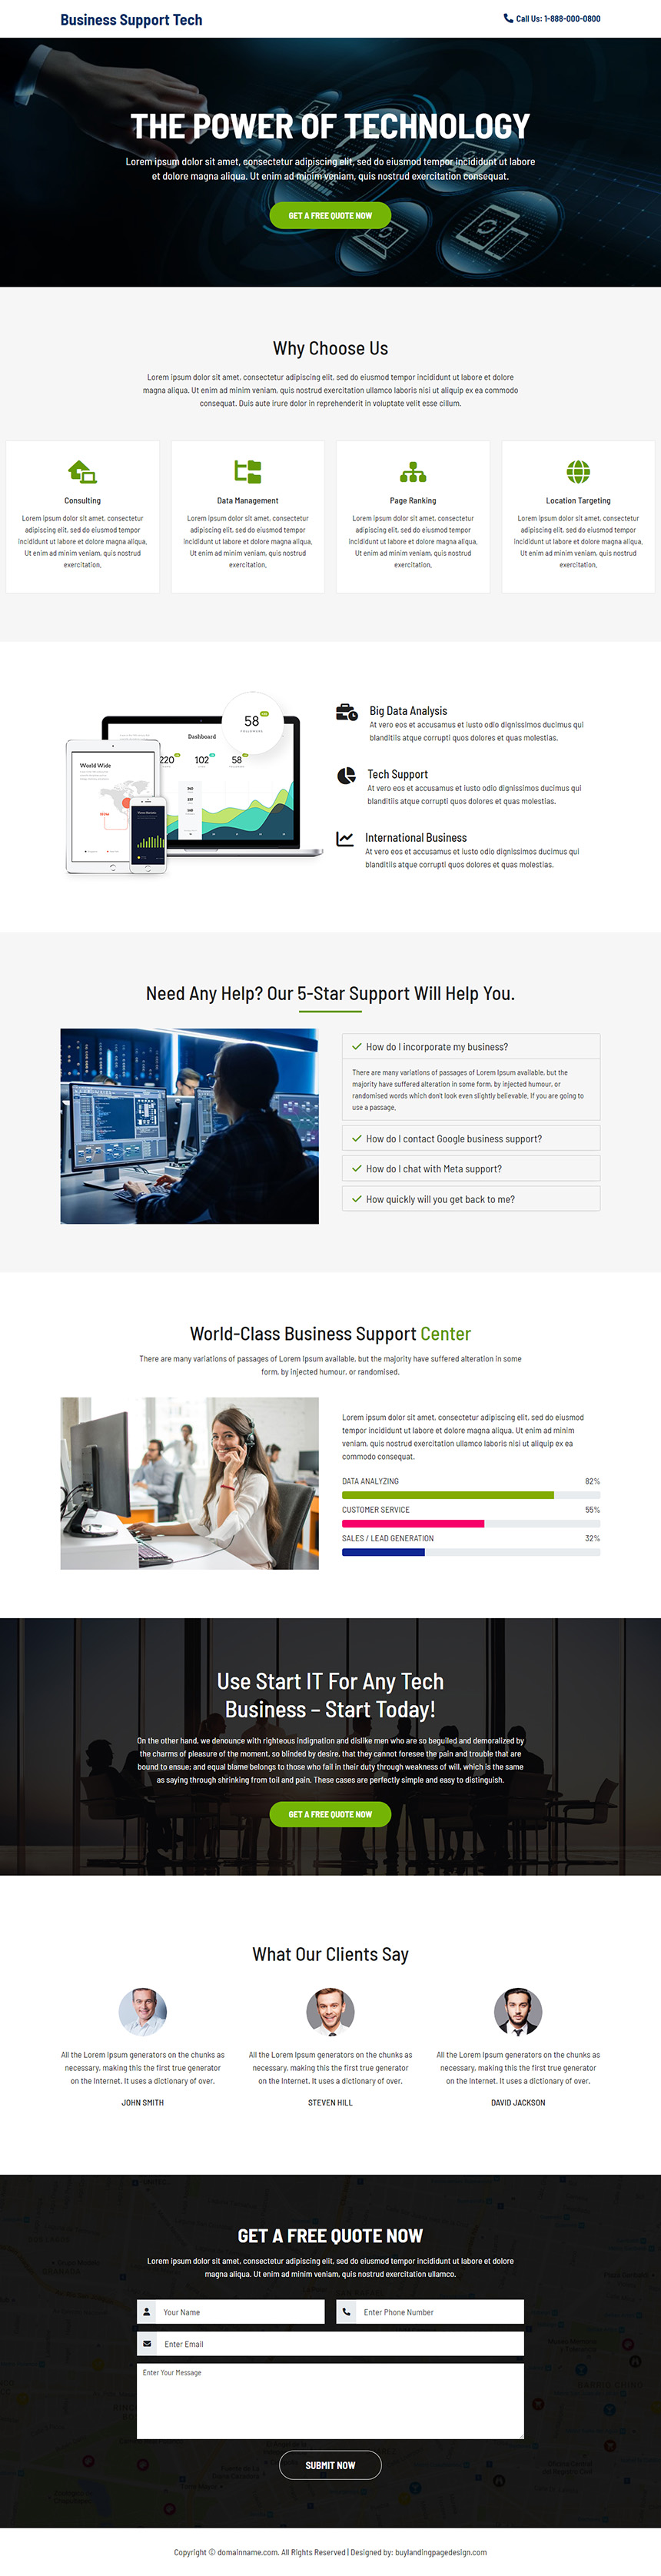 business support center responsive landing page